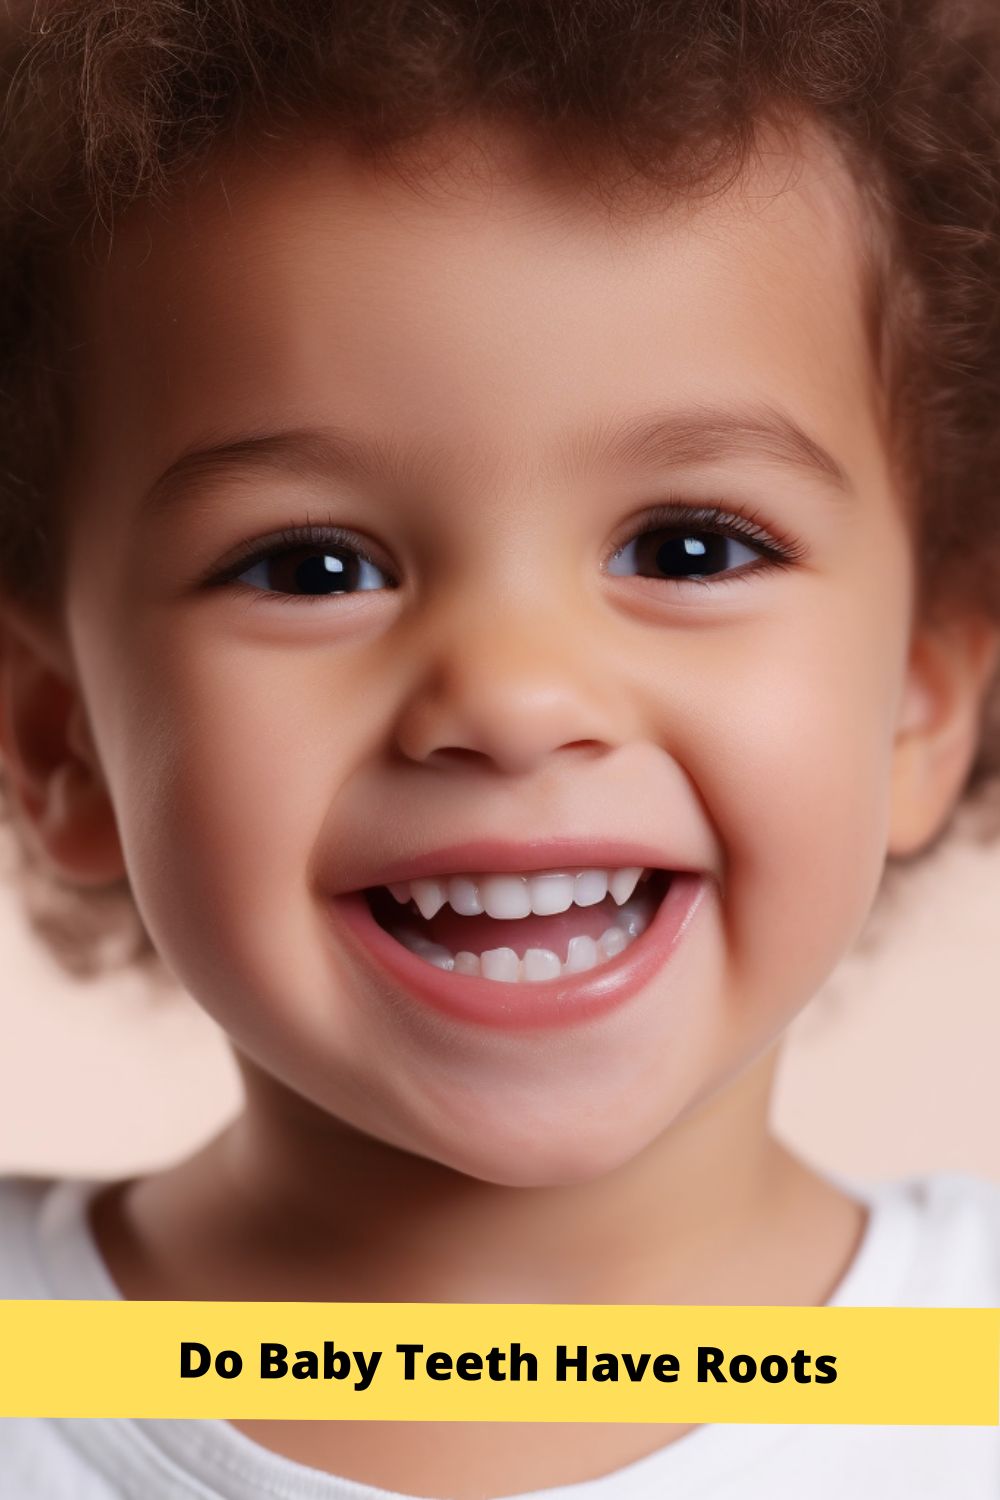 Do Baby Teeth Have Roots